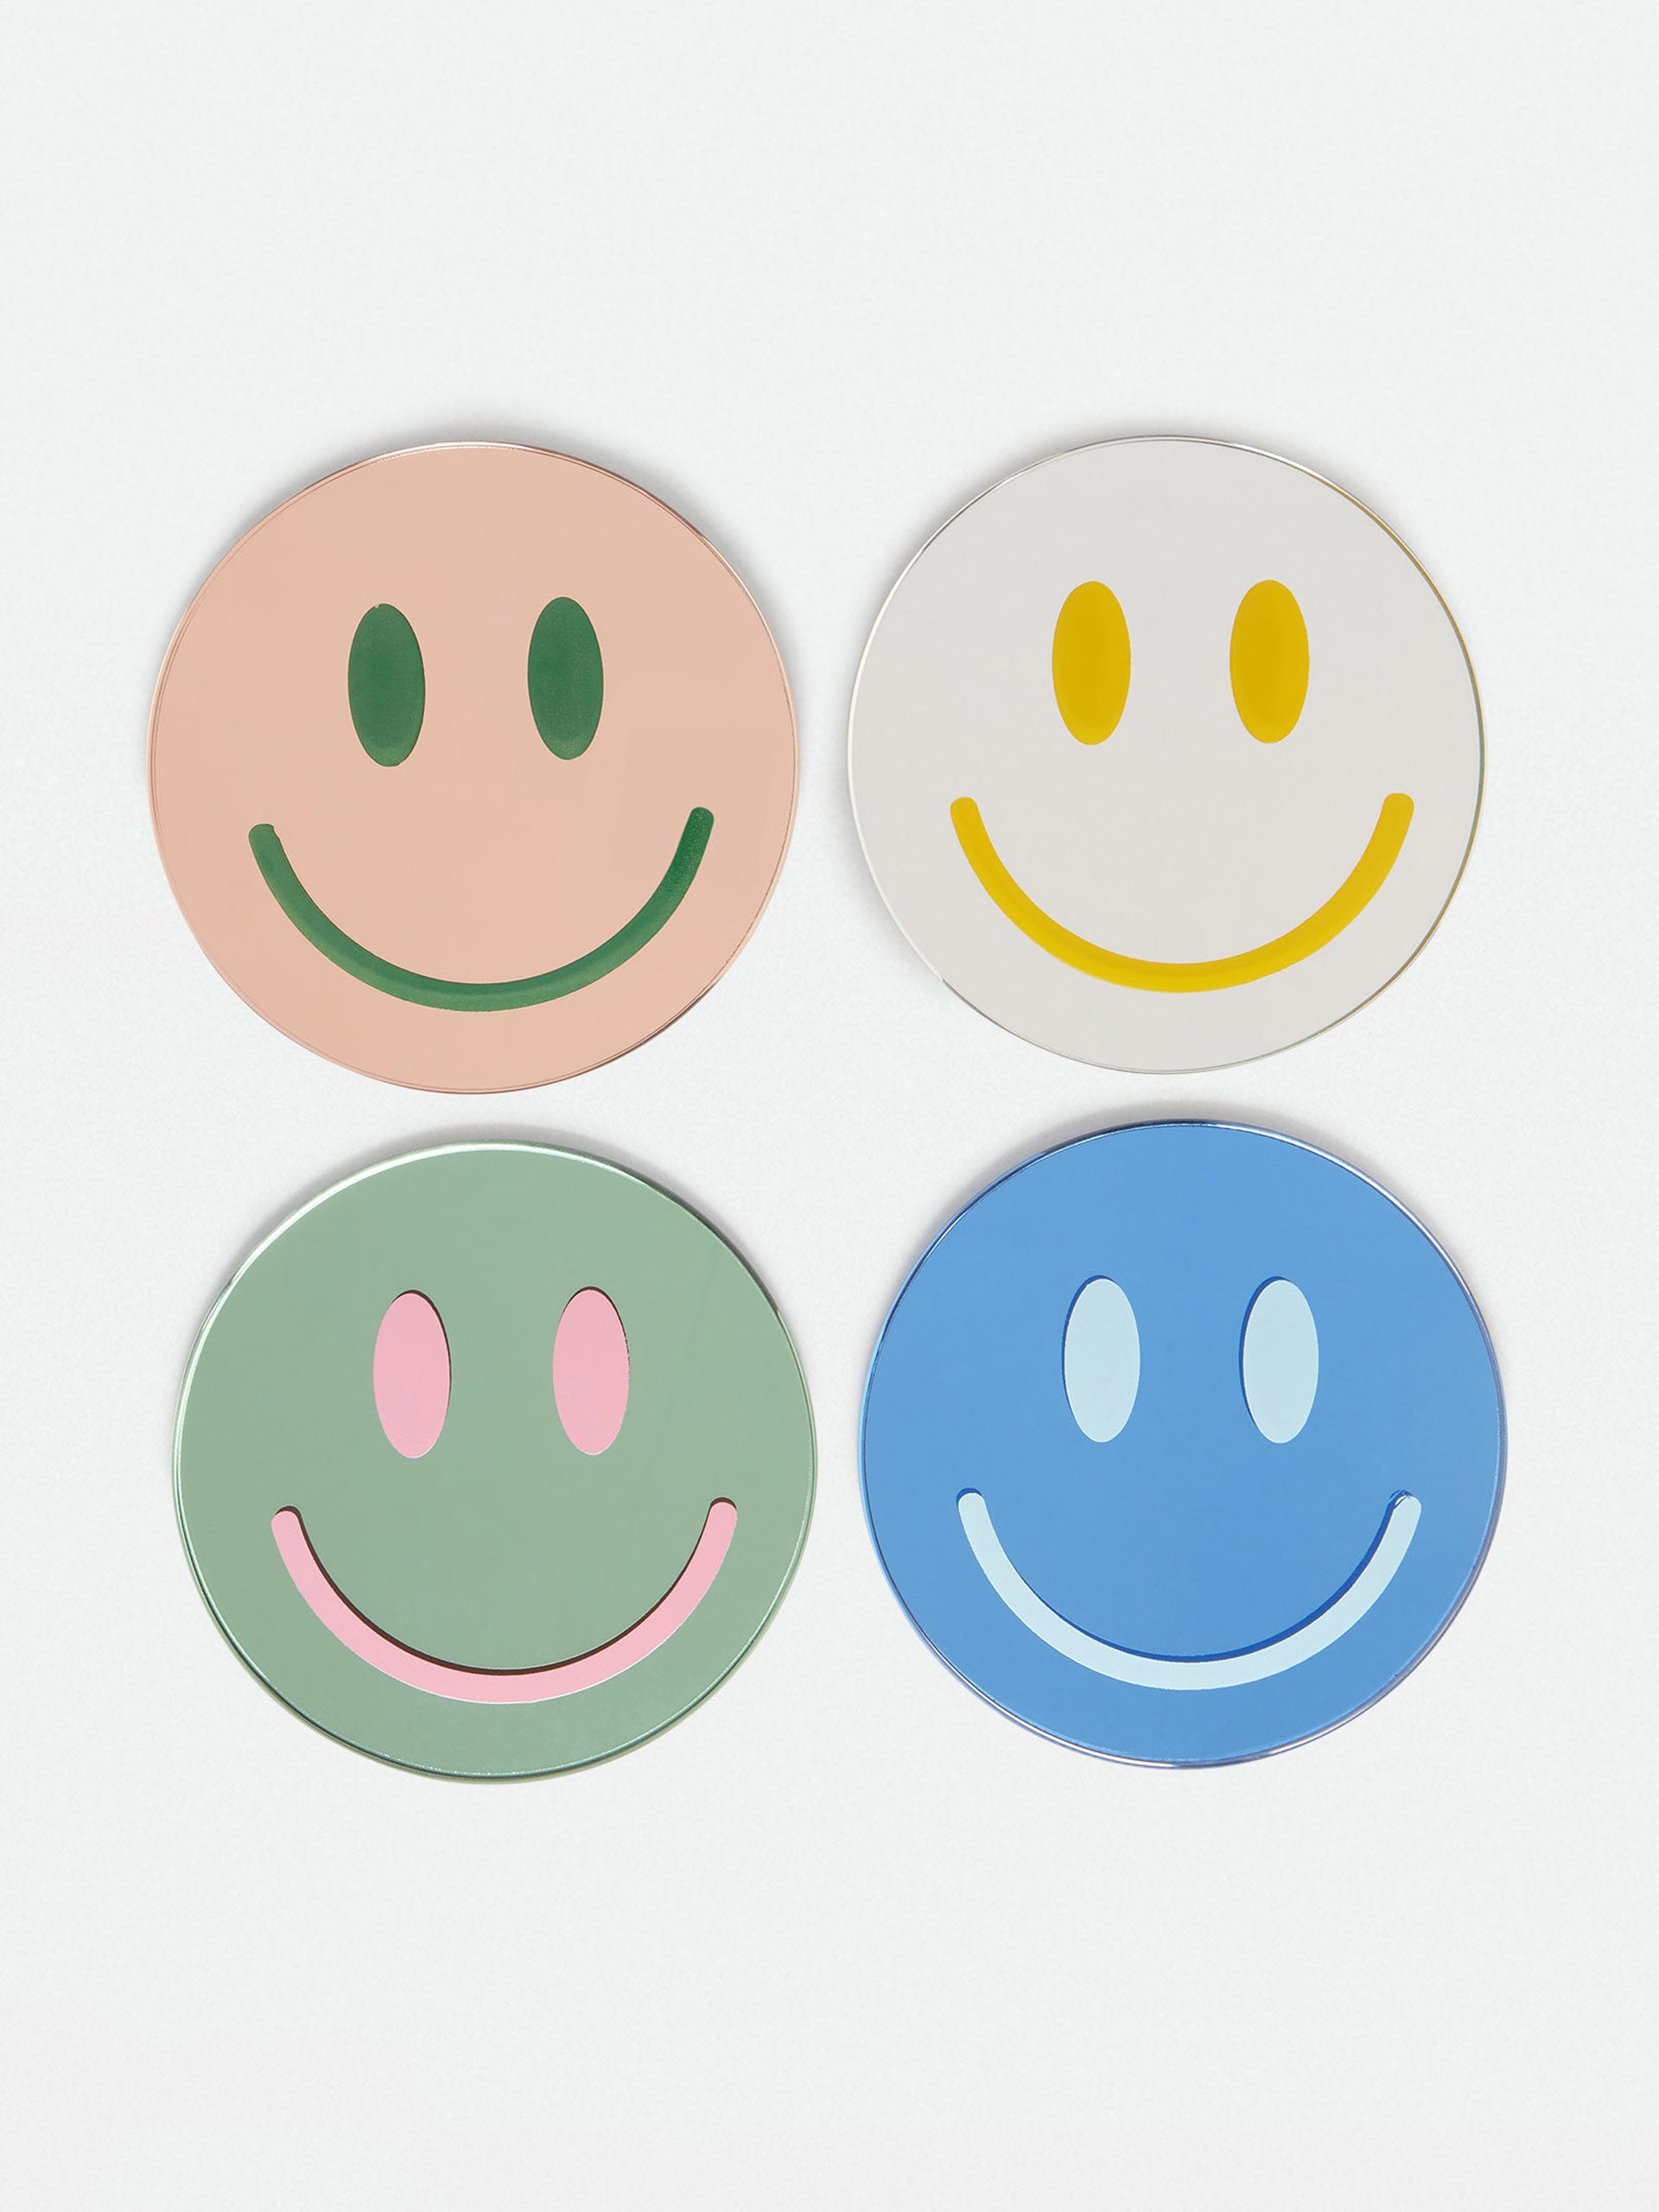 Smiley face coasters